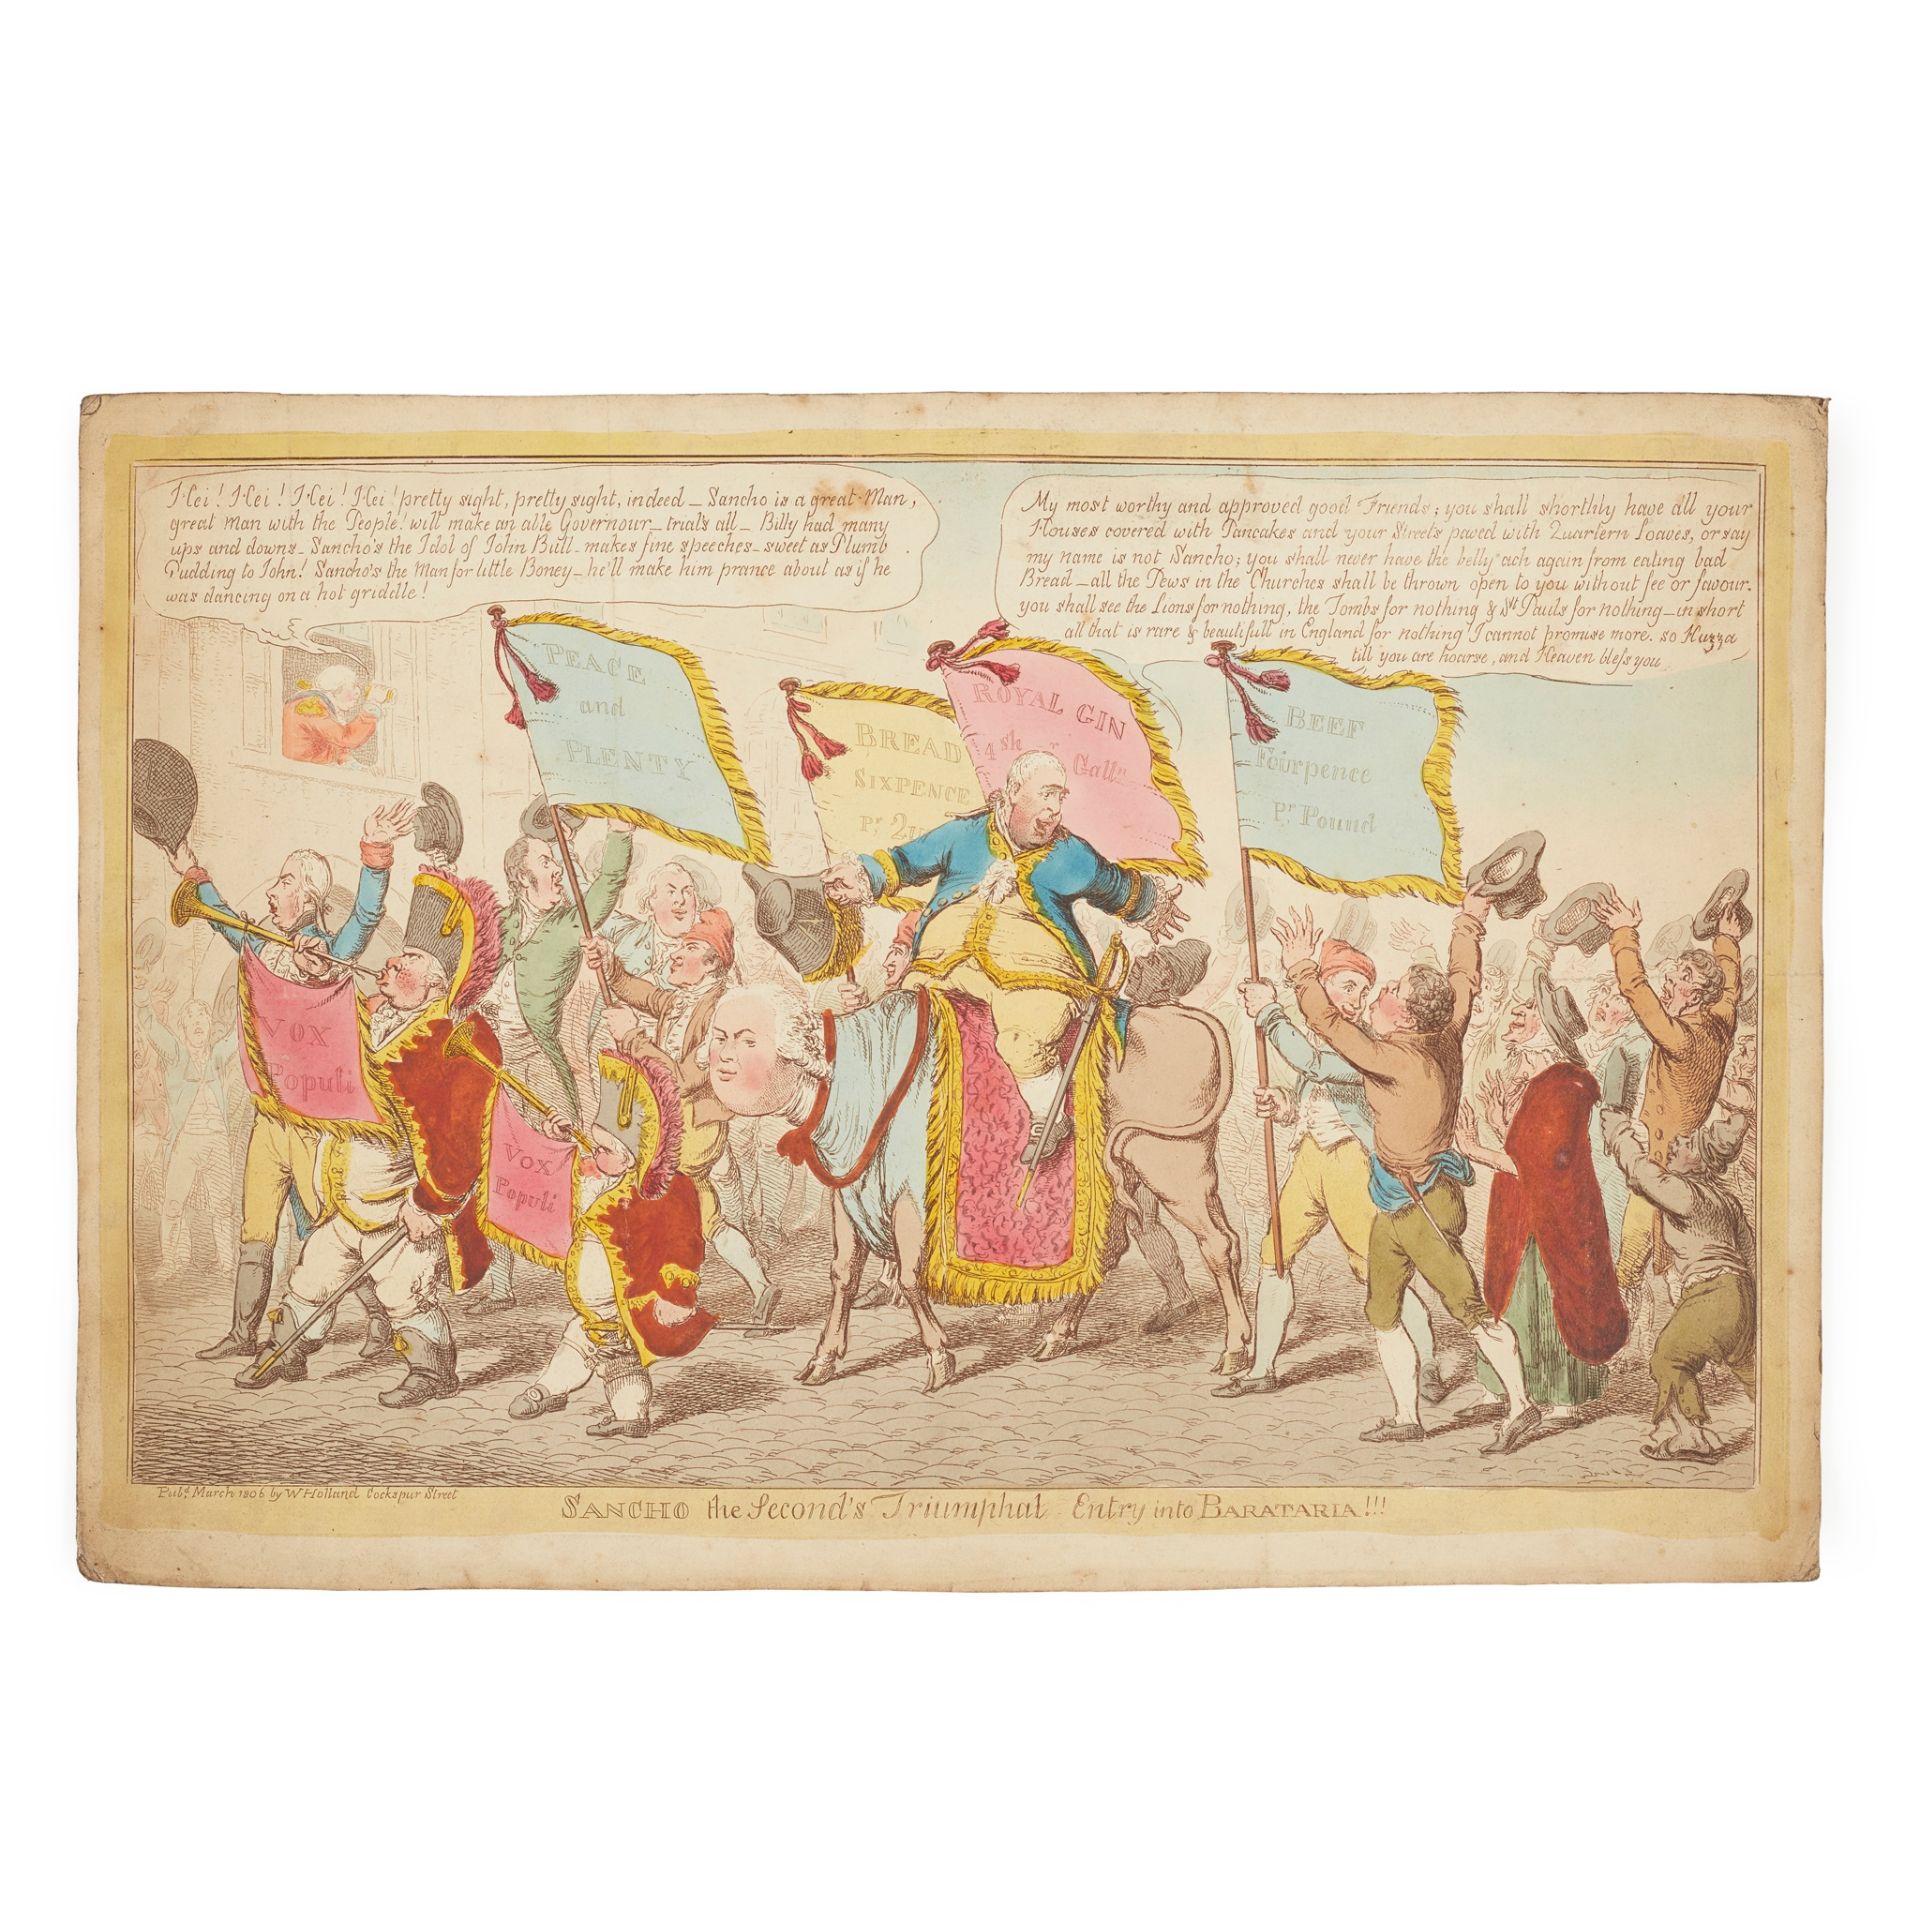 COLLECTION OF SATIRICAL ENGRAVINGS, JAMES GILLRAY AND OTHERS EARLY 19TH CENTURY - Image 4 of 14